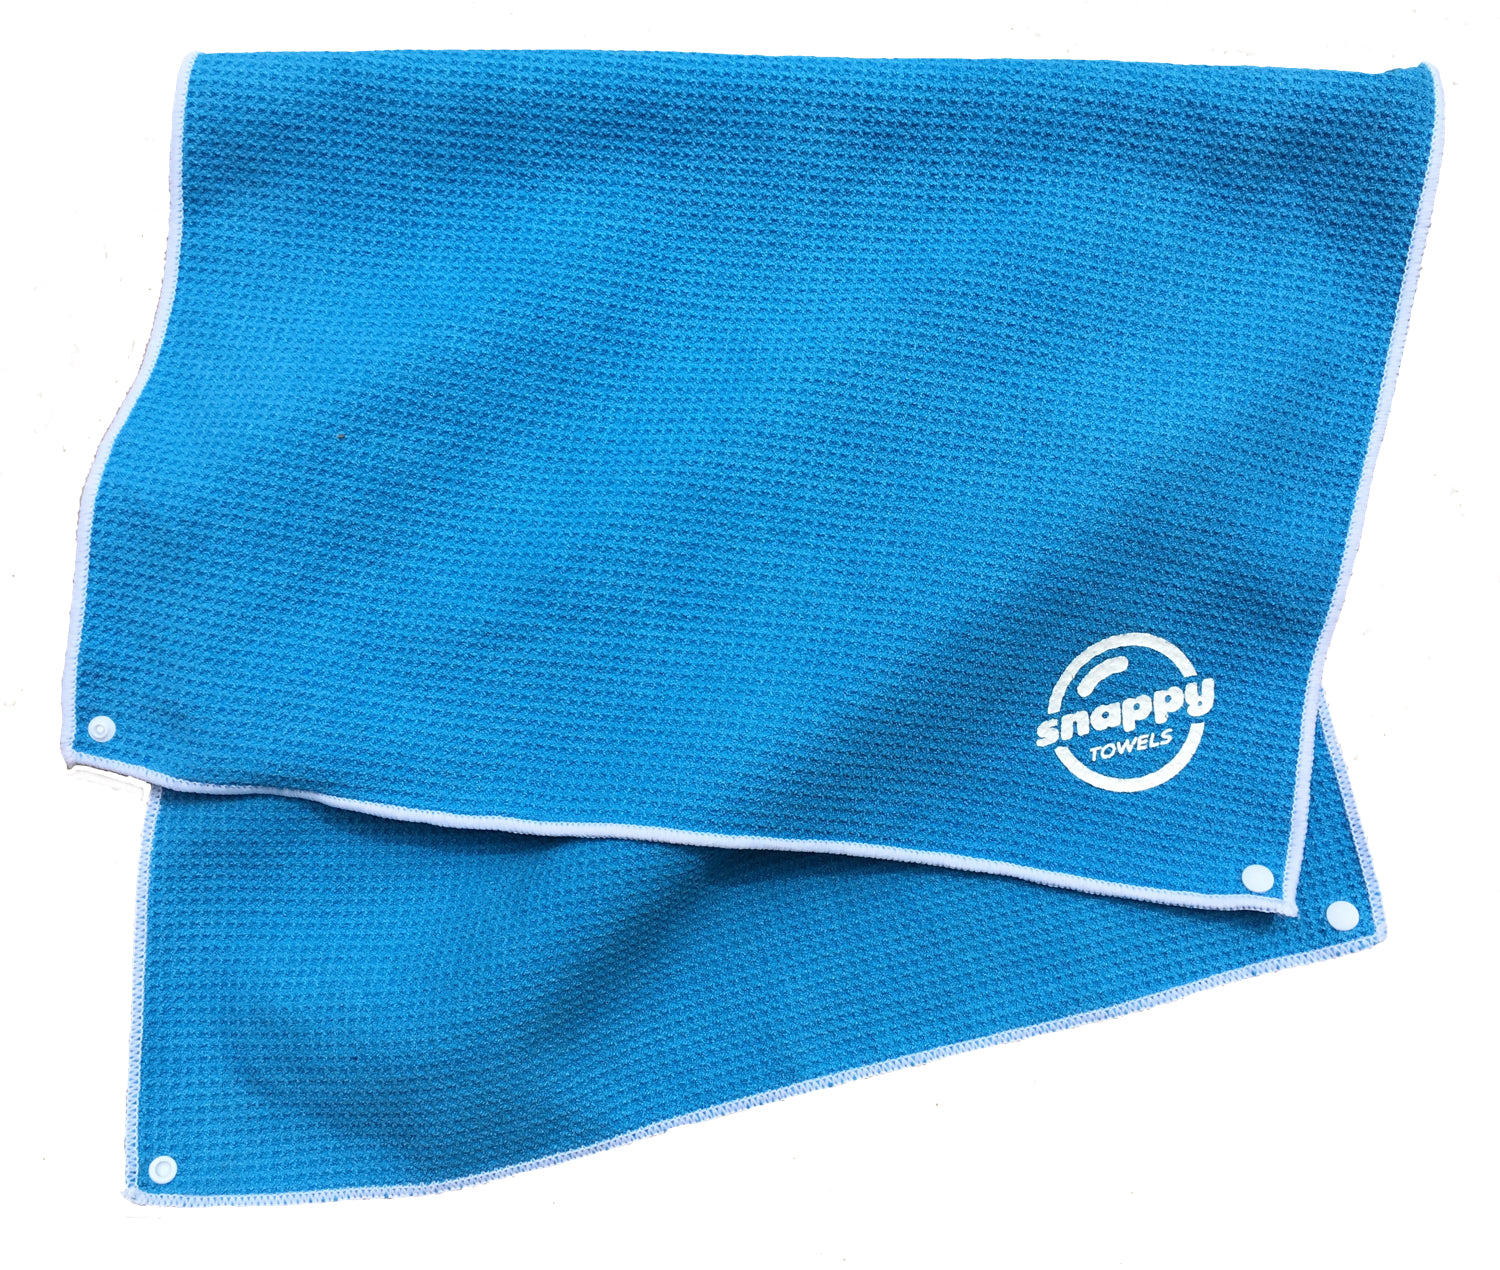 Snappy Towels® Limited Edition Microfiber Towel Set - Fitness 31x20